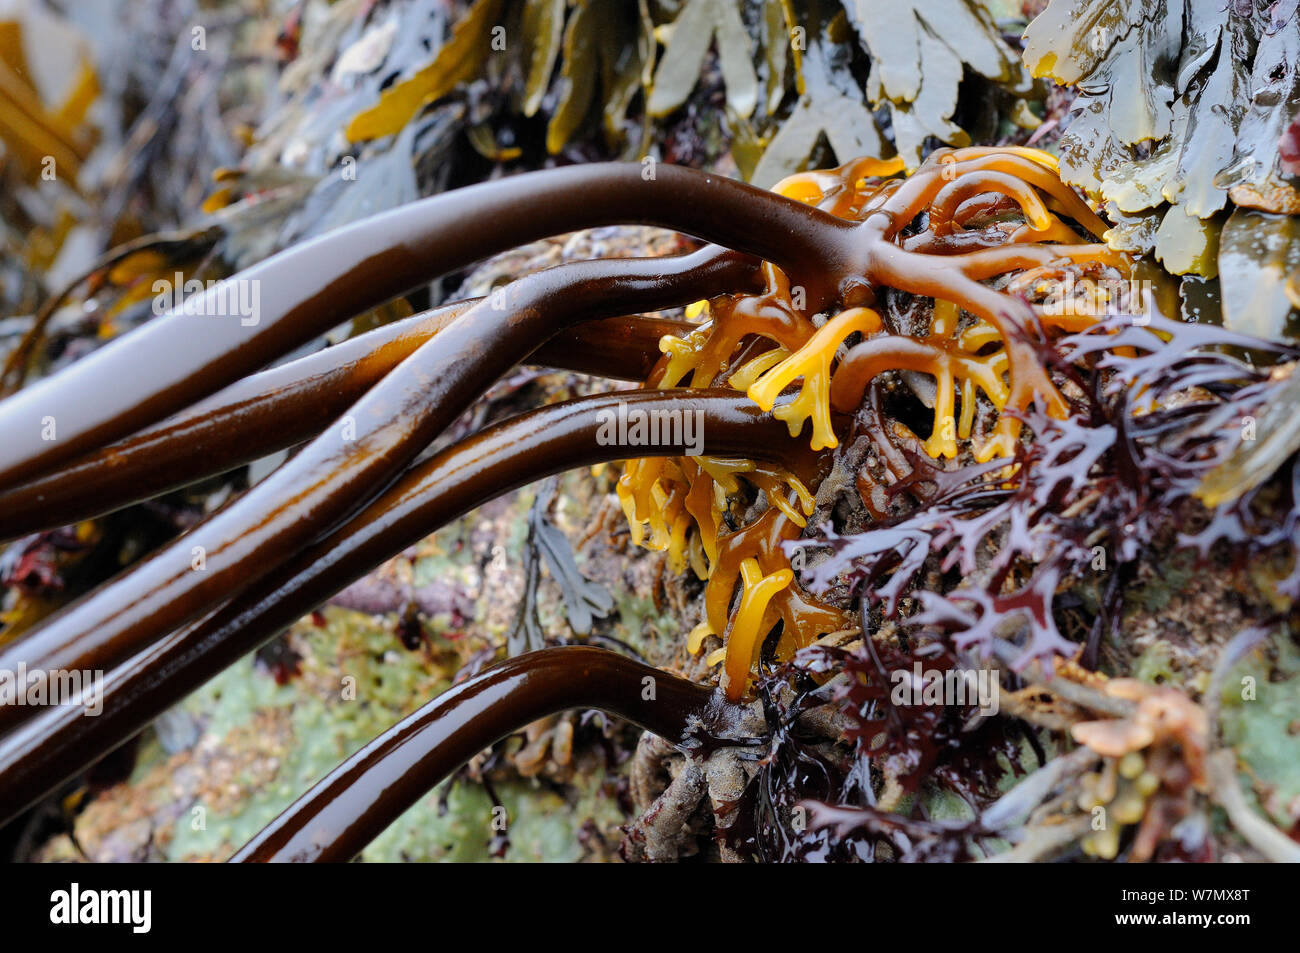 Holdfast of Cuvie / Forest kelp (Laminaria hyperborea) fronds attached to rocks exposed on a low spring tide alongside Toothed wrack (Fucus serratus), North Berwick, East Lothian, UK, July. Stock Photo